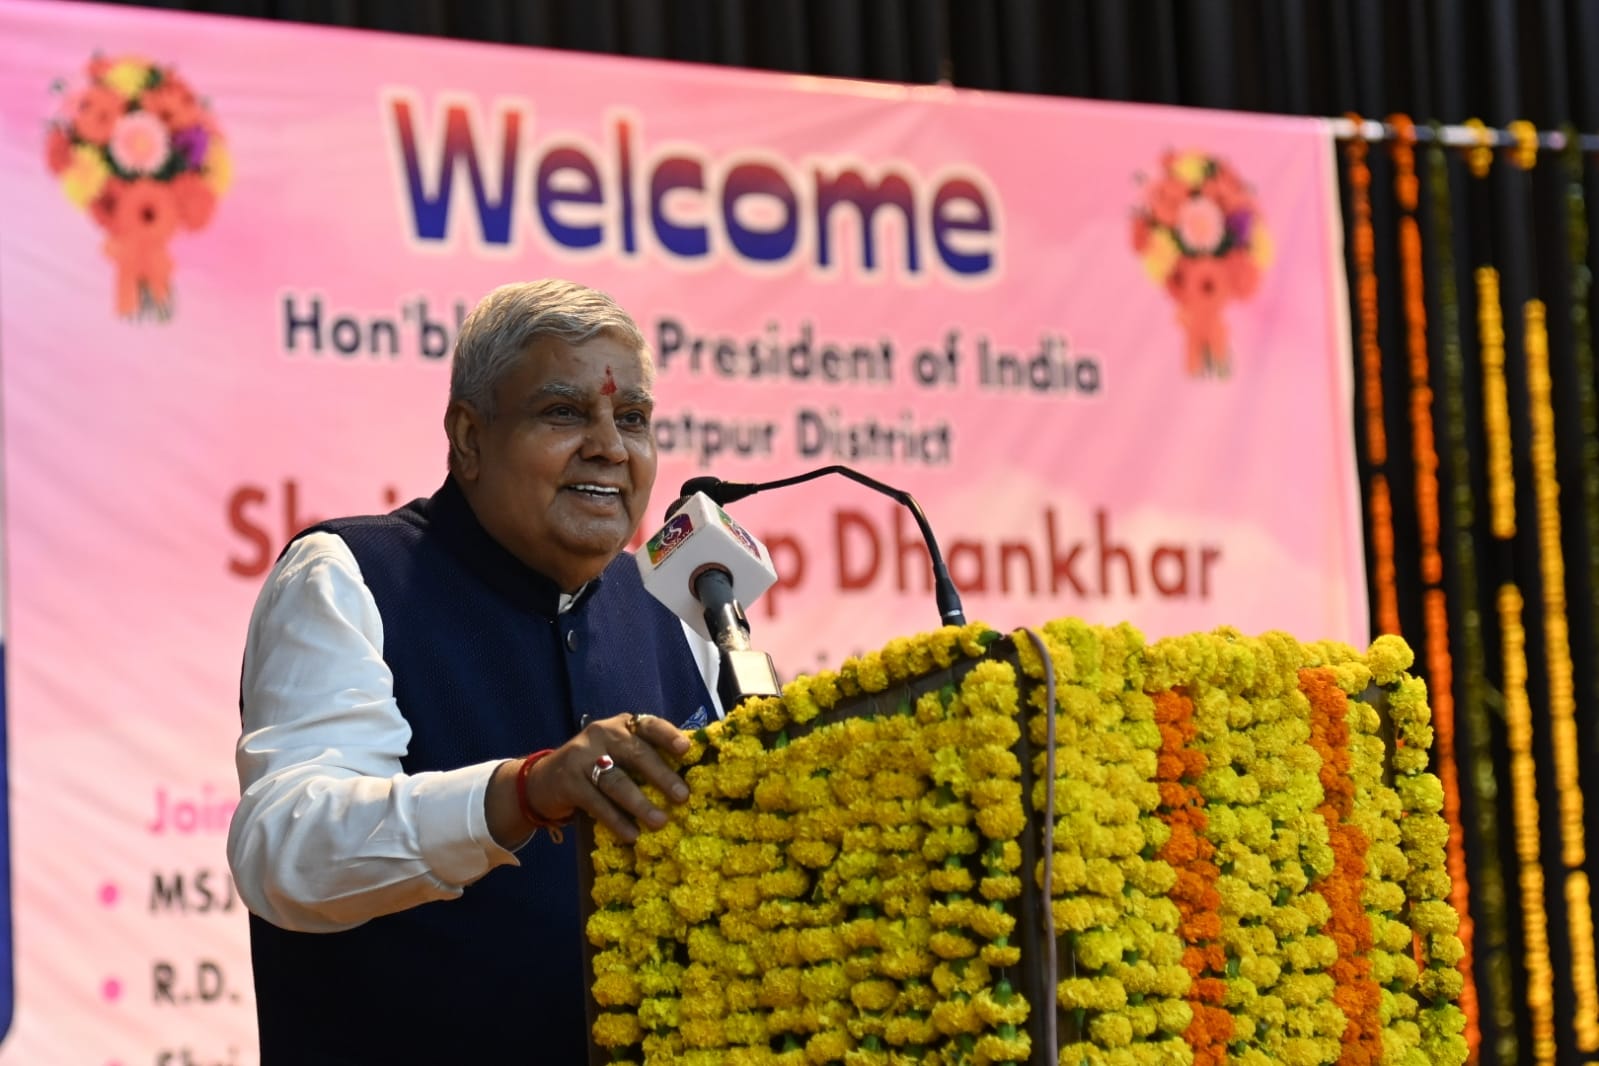 The  Vice-President, Shri Jagdeep Dhankhar addressing the students of MSJ College and Rameshwari Devi Government Girls College in Bharatpur, Rajasthan on September 12, 2023.